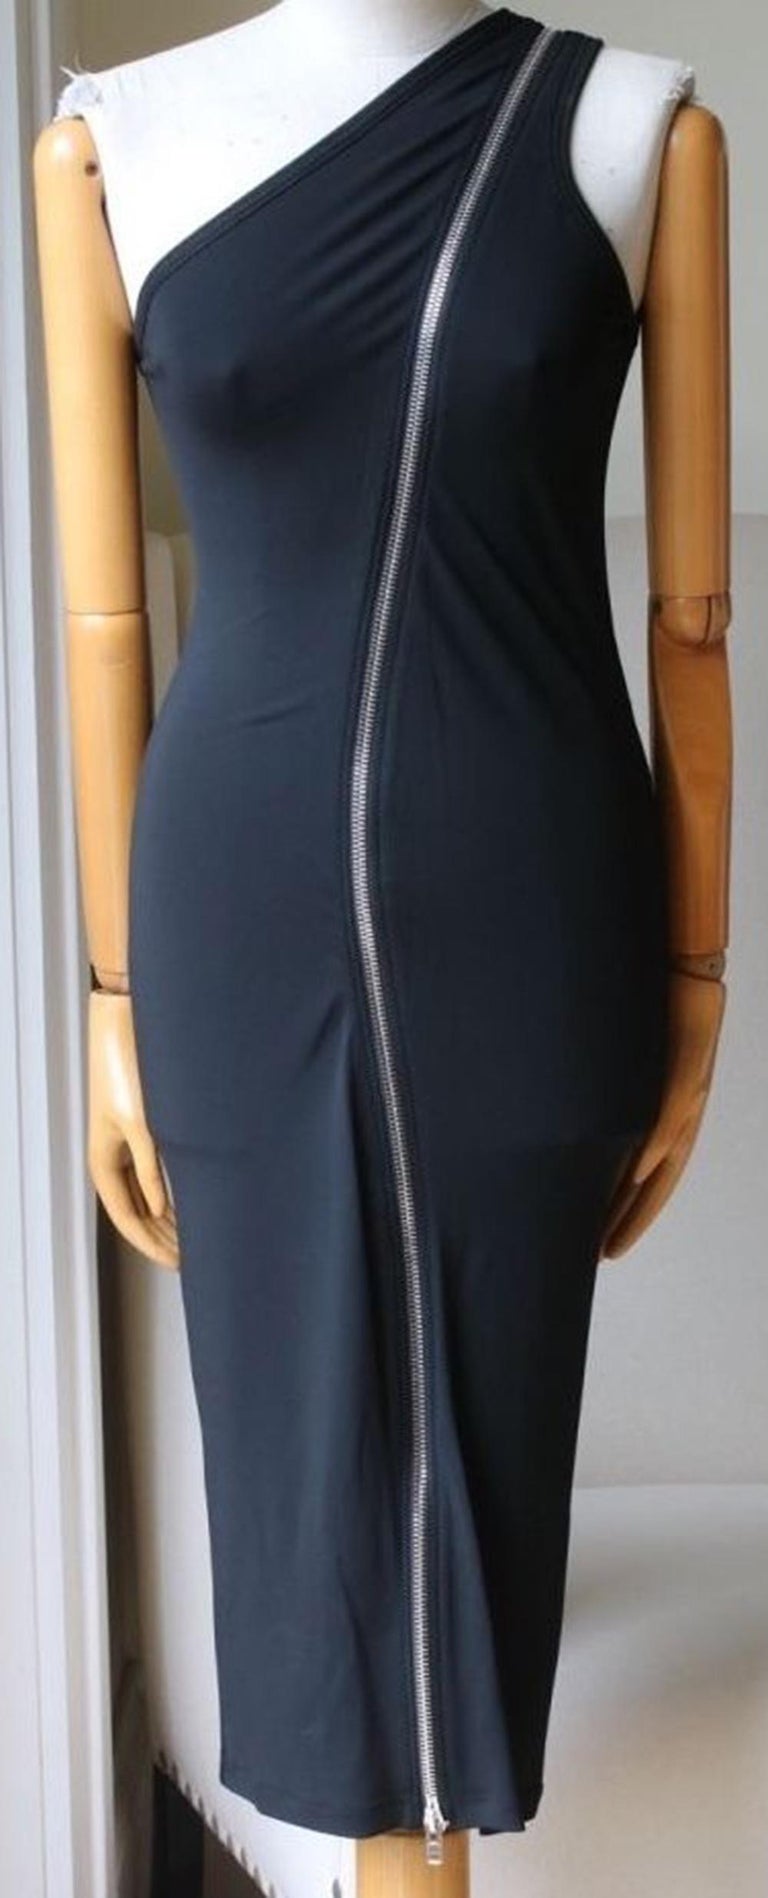 Made from stretch-jersey, this midi dress is detailed with an asymmetric silver one through the front and back that traces the slim one-shoulder silhouette. Black stretch-jersey. One shoulder, asymmetric two-way zip through front and back. Slips on.